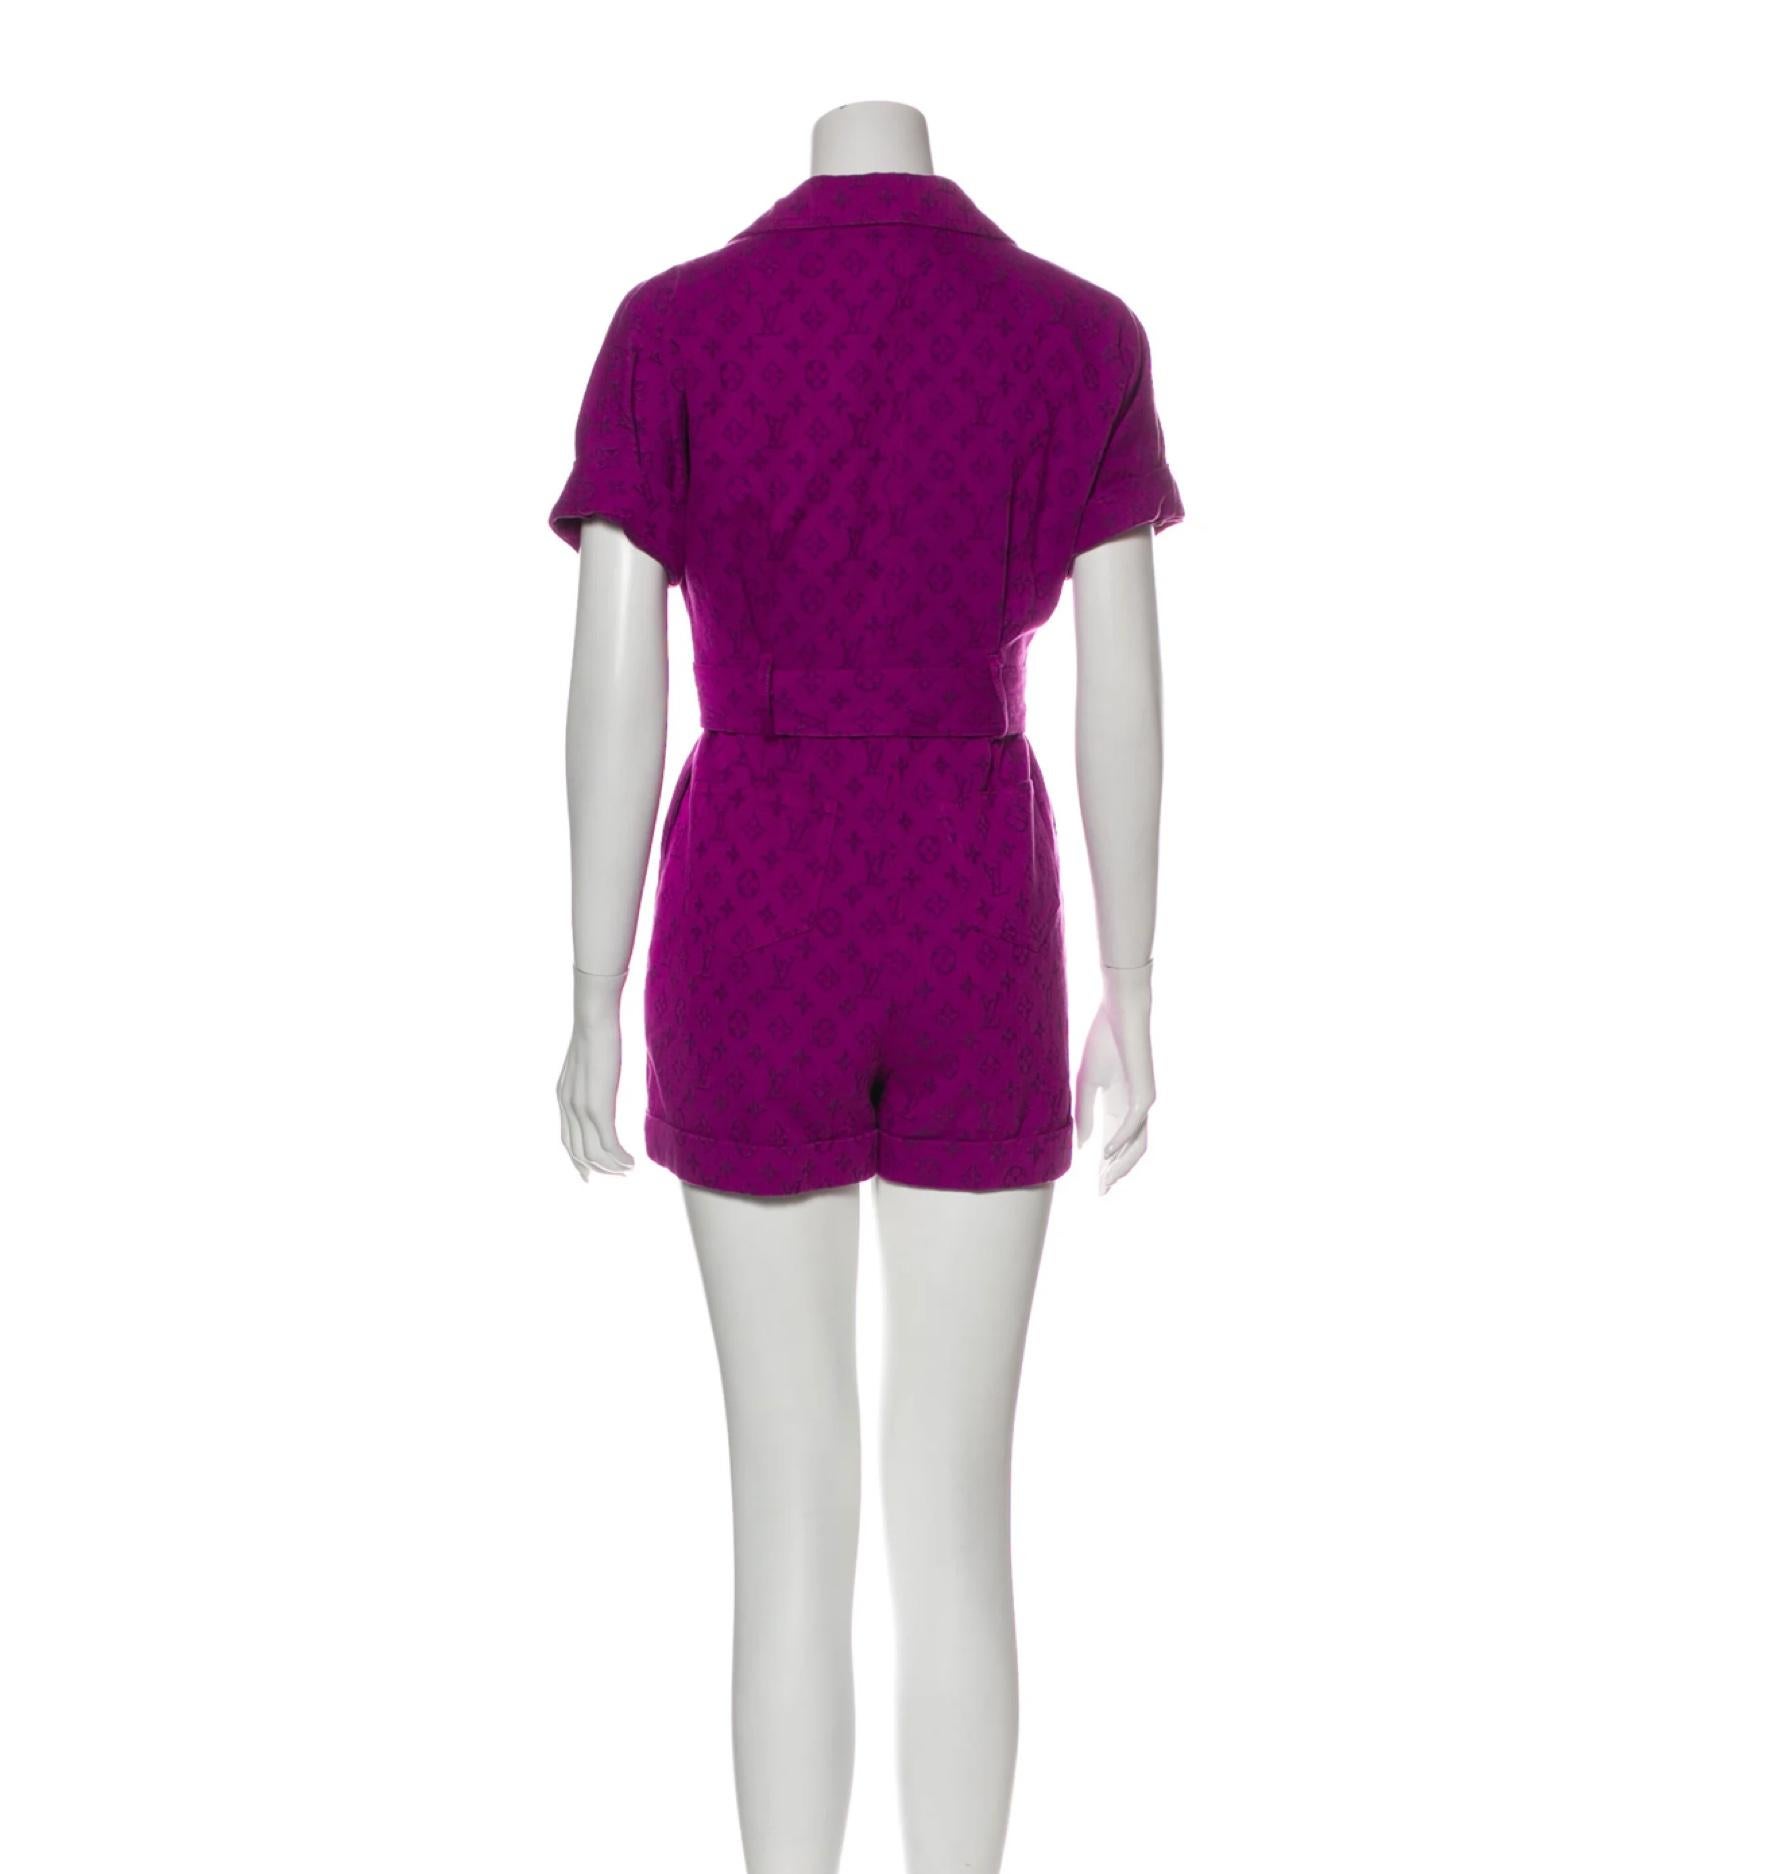 Louis Vuitton V Neck Romper. Featuring short sleeves with a v-neck design and button closures at the front. 

COLOR: Purple
MATERIAL: 100% cotton
SIZE: Small 
CONDITION: Excellent, no visible signs of wear. 

MEASURES
Bust: 28